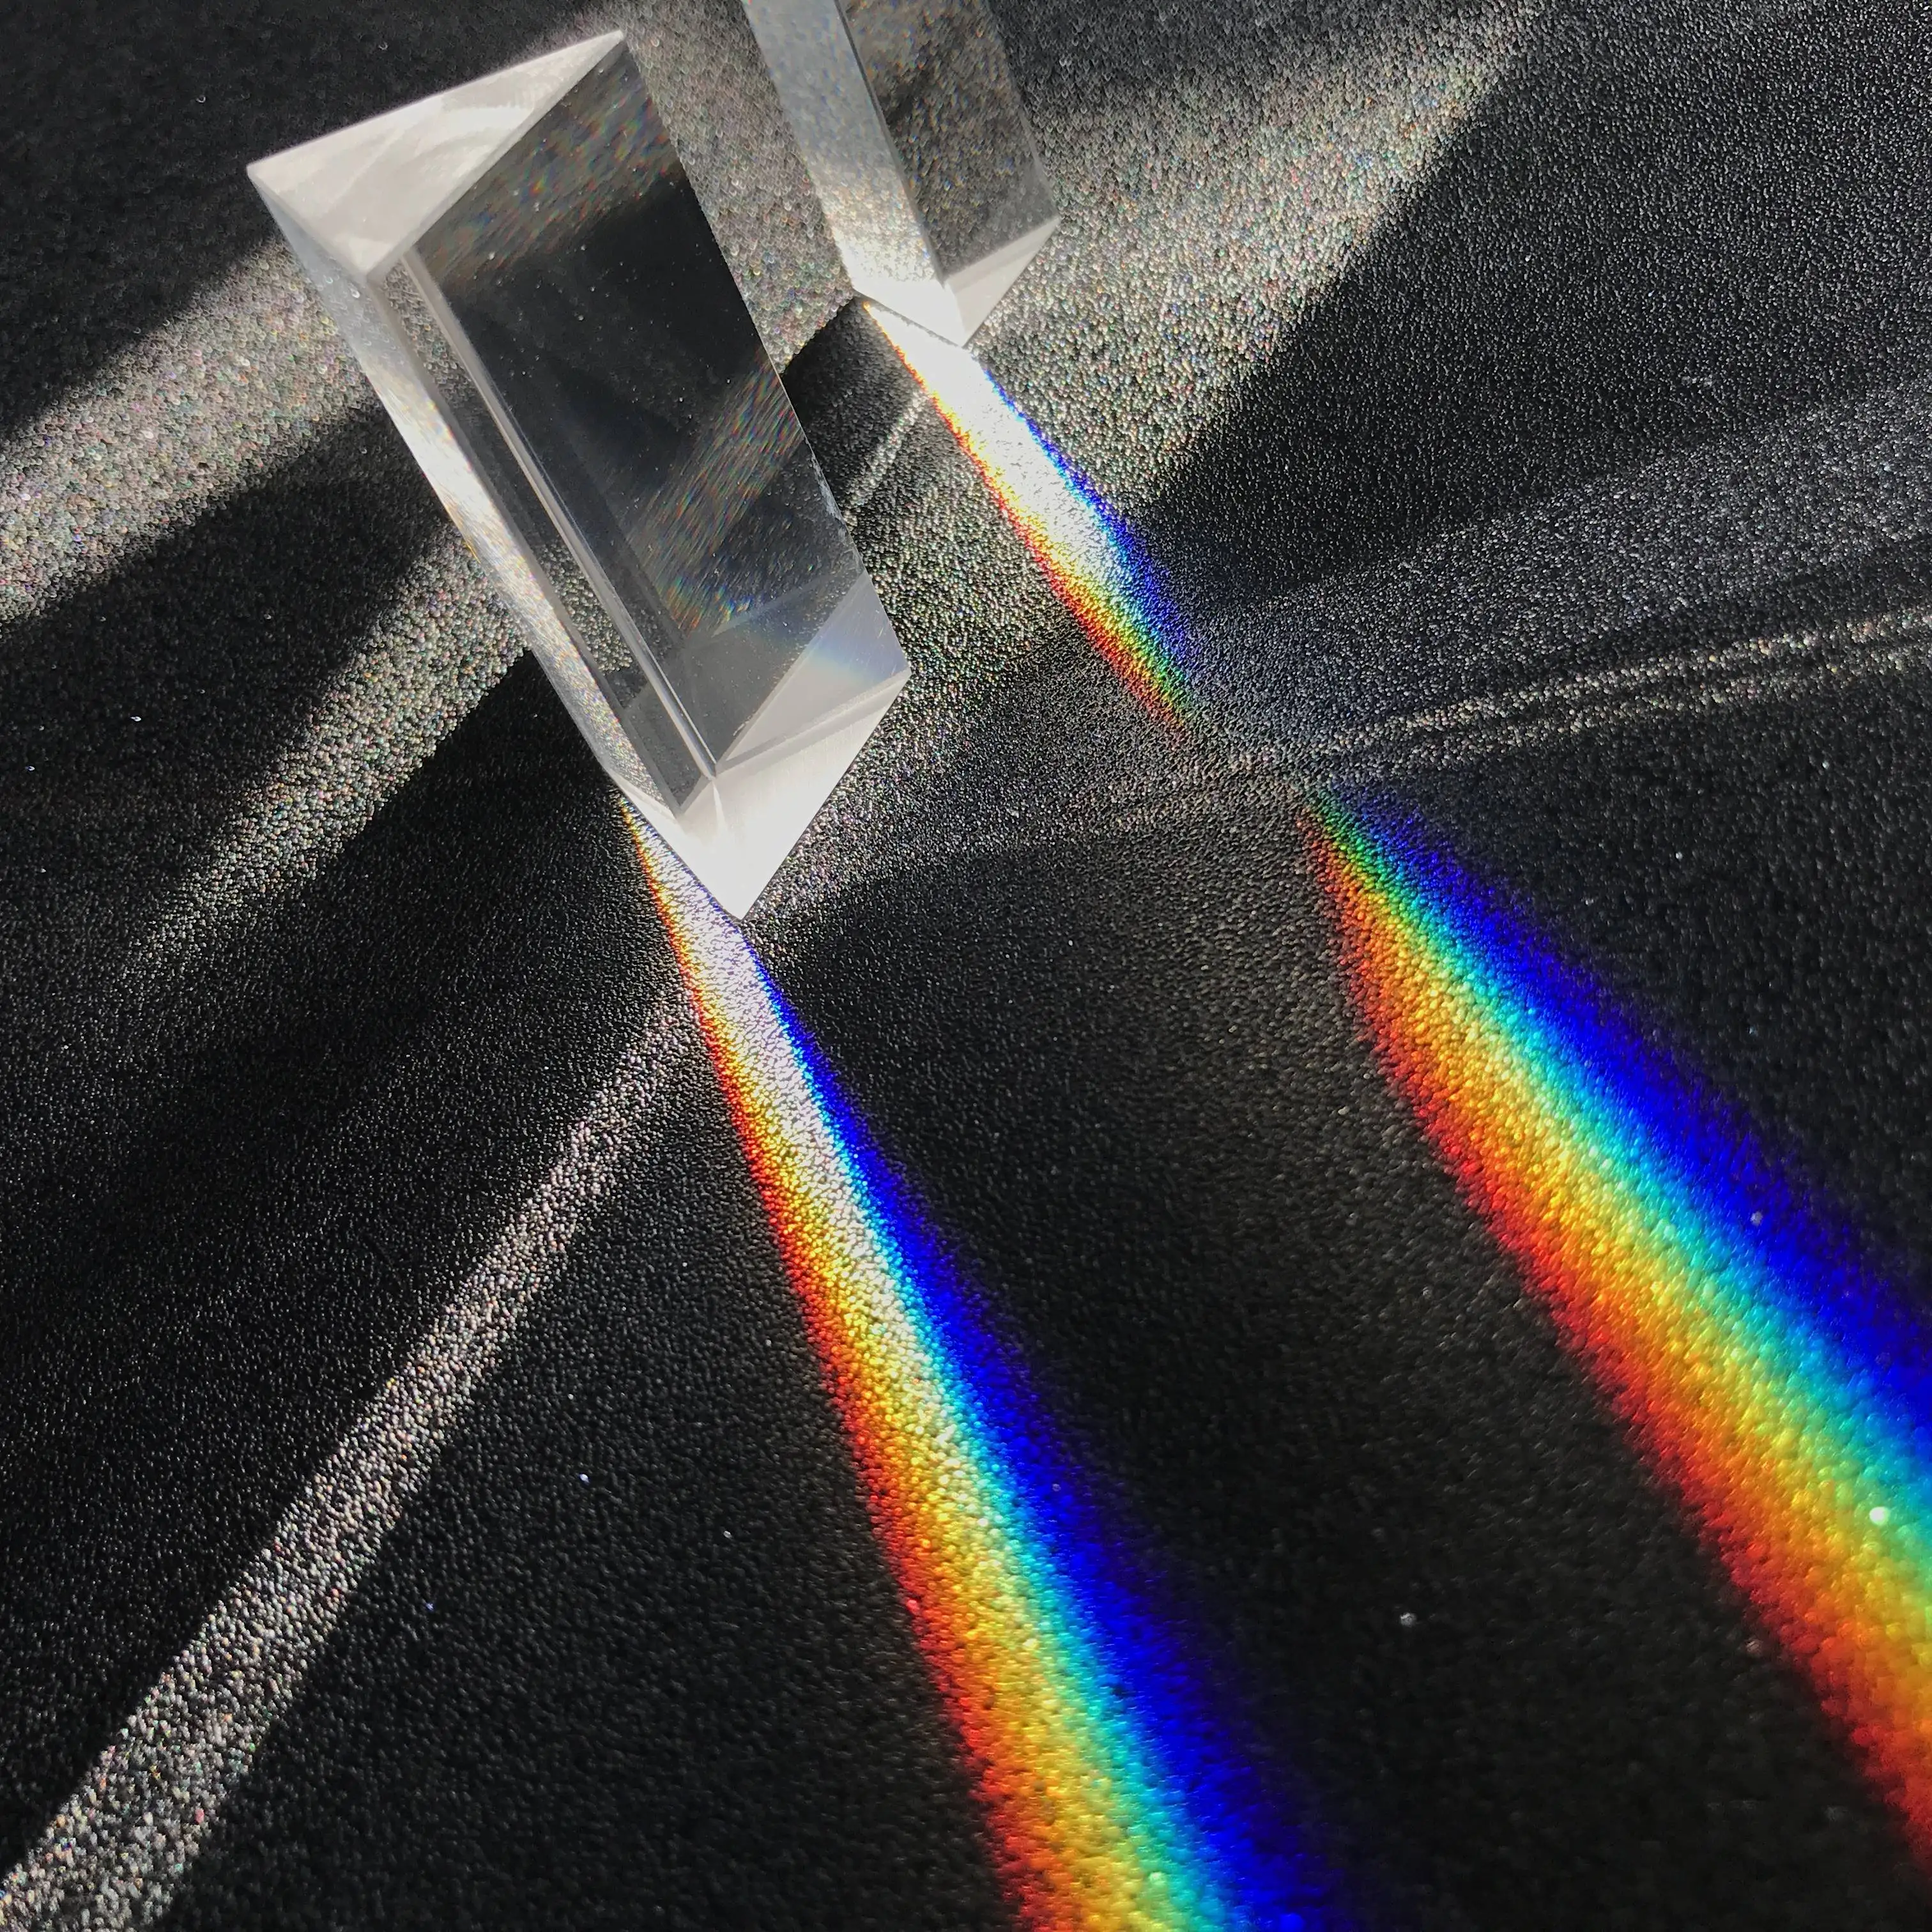 

25*25*80MM K9 Crystal Triangular Prism for Teaching Light Spectrum Physics Photo Optical Instruments Rainbow Experiment